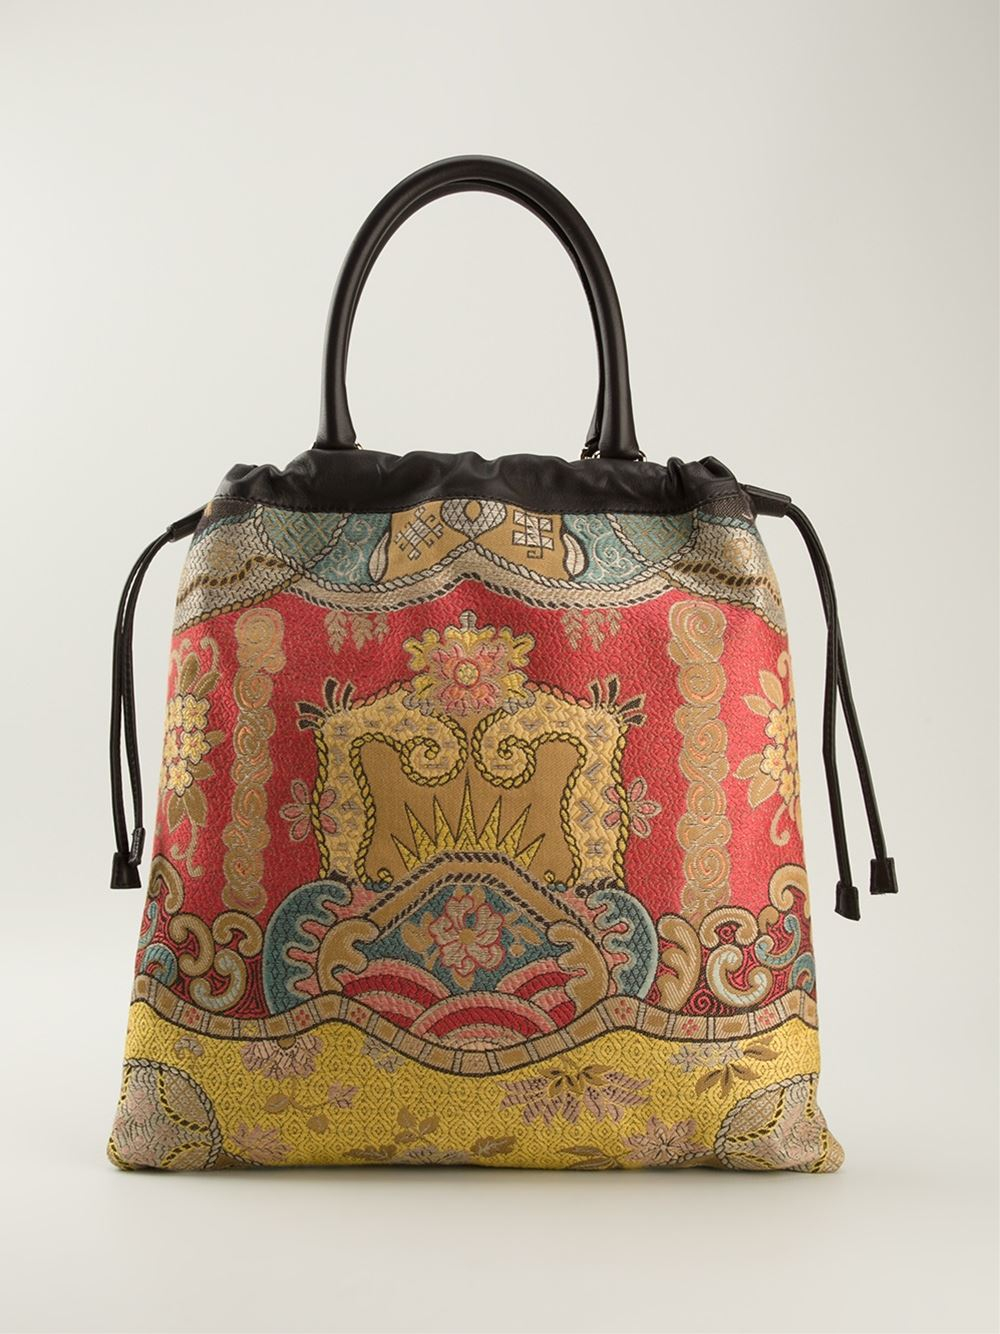 Lyst - Etro Embroidered Tote Bag for Men